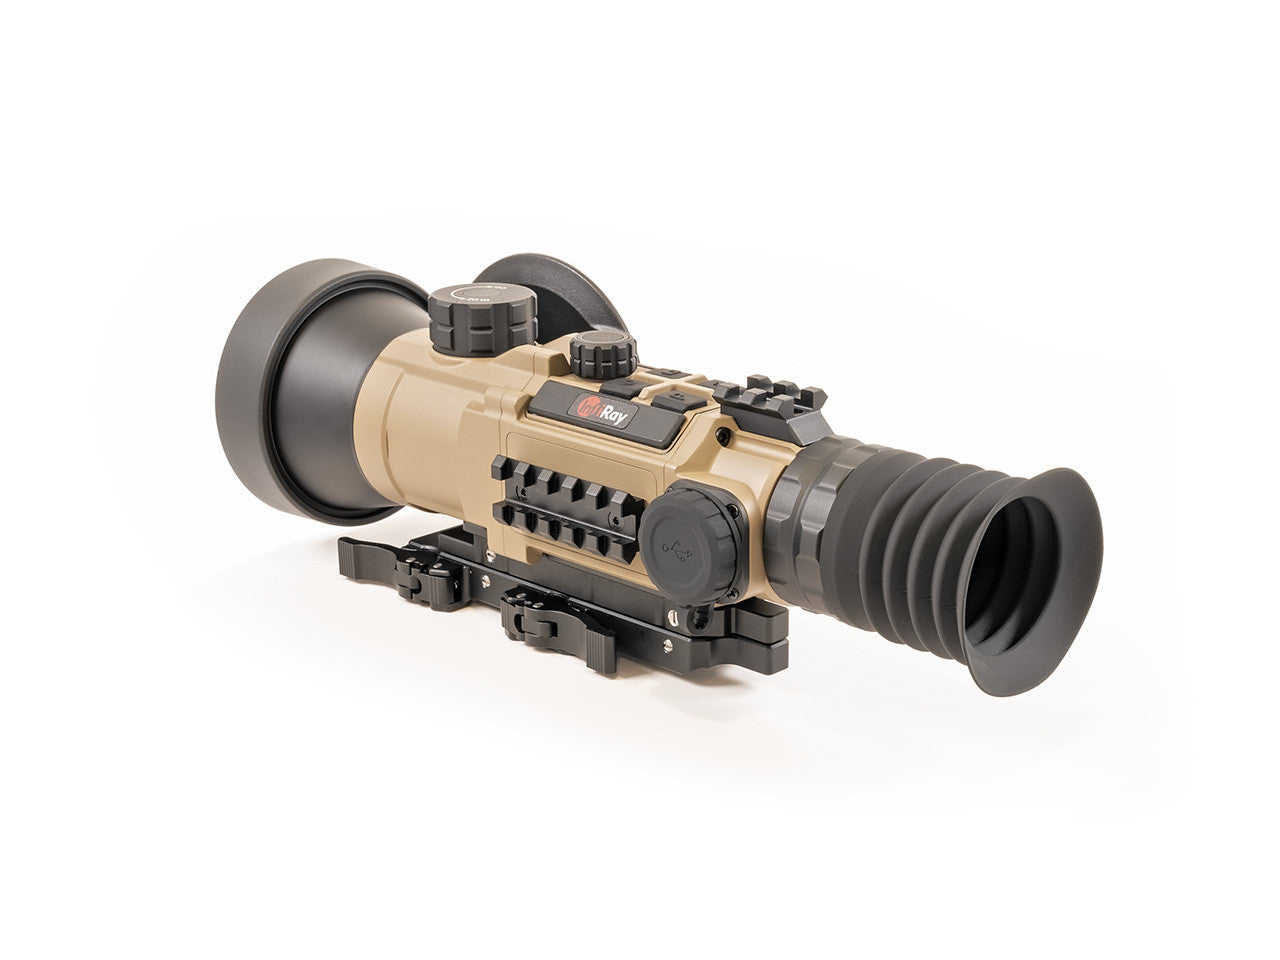 InfiRay Outdoor RICO Hybrid 75 4-32x LRF Thermal Rifle Scope